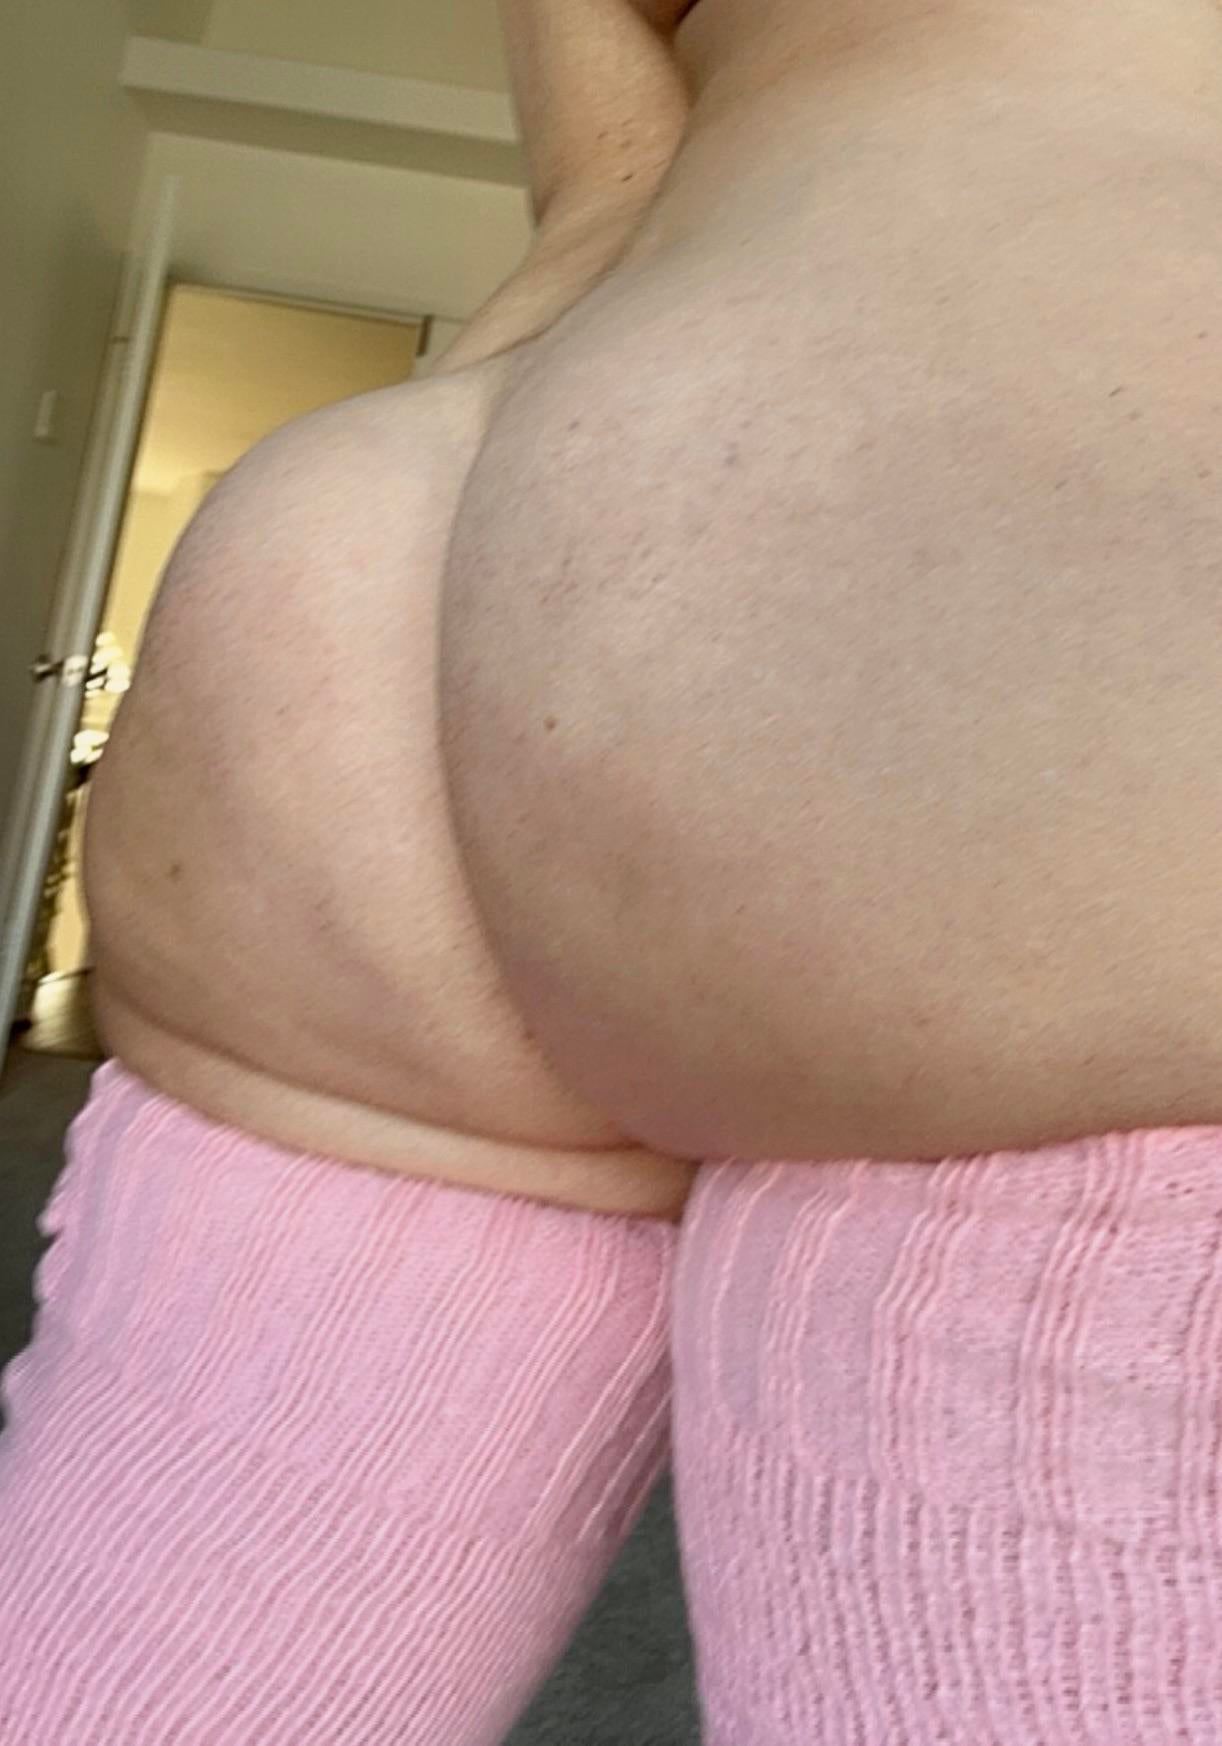 PAWG PAWG in thigh high socks… I hope your dick